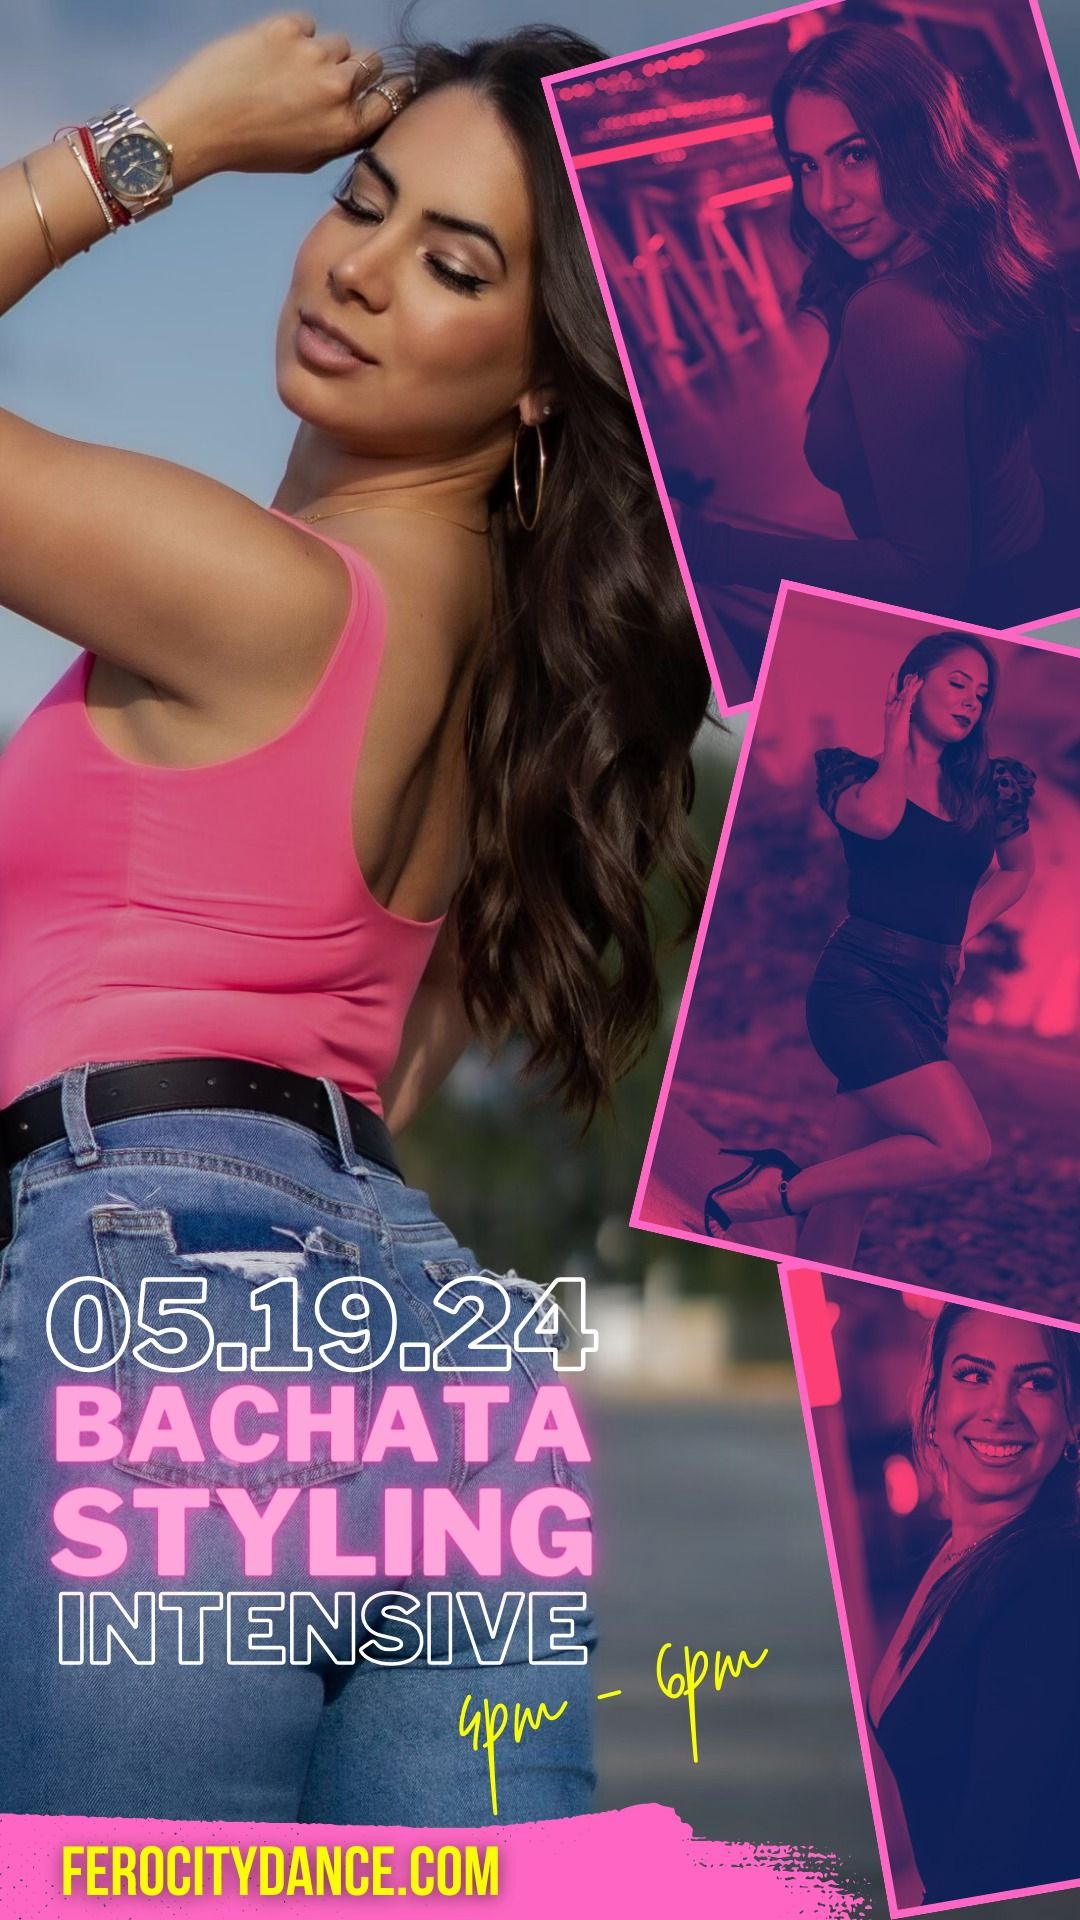 Bachata Styling Intensive with Ximena! 